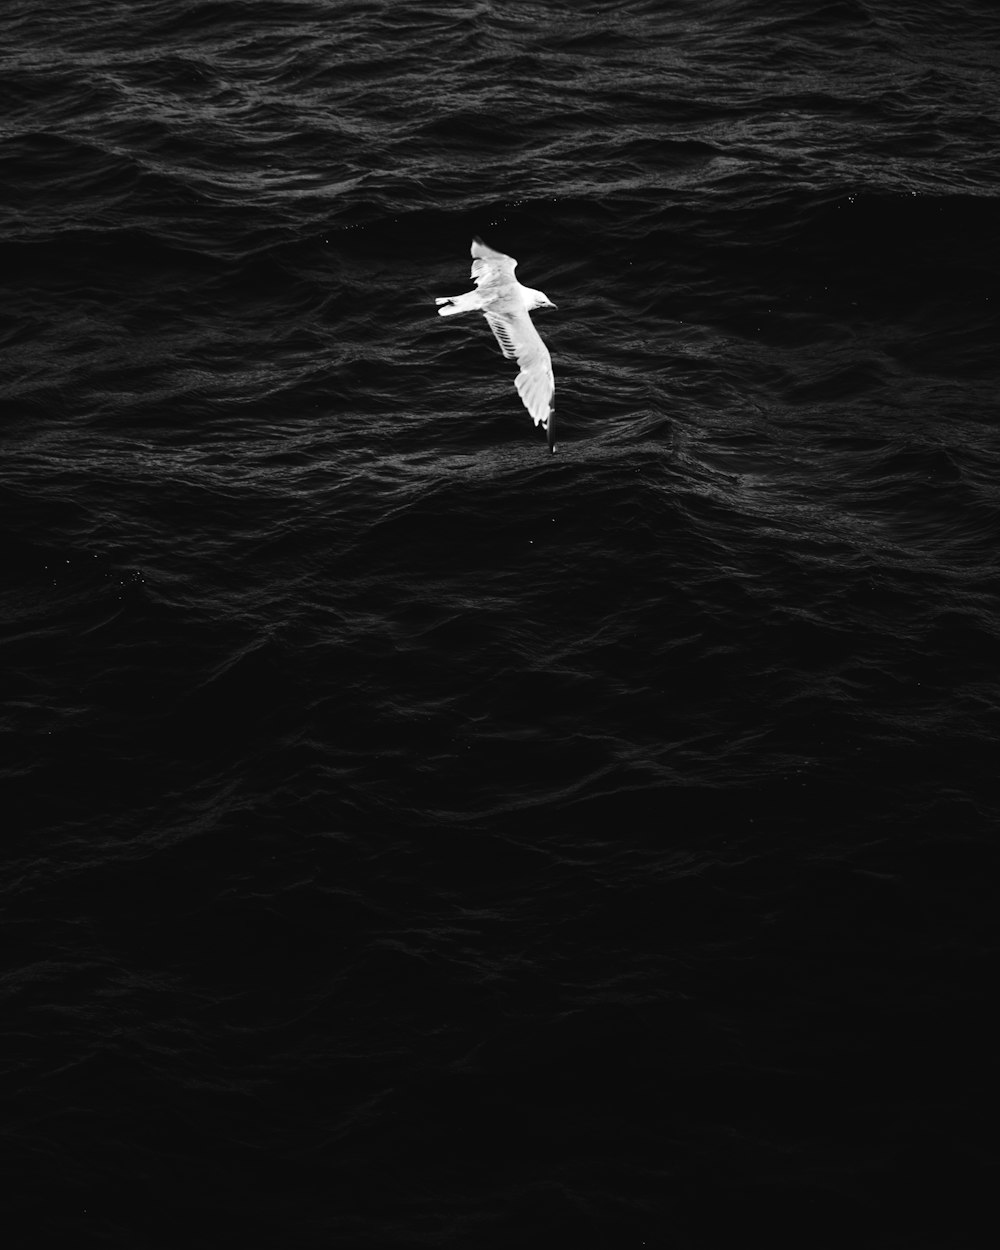 soaring white bird over rippling water